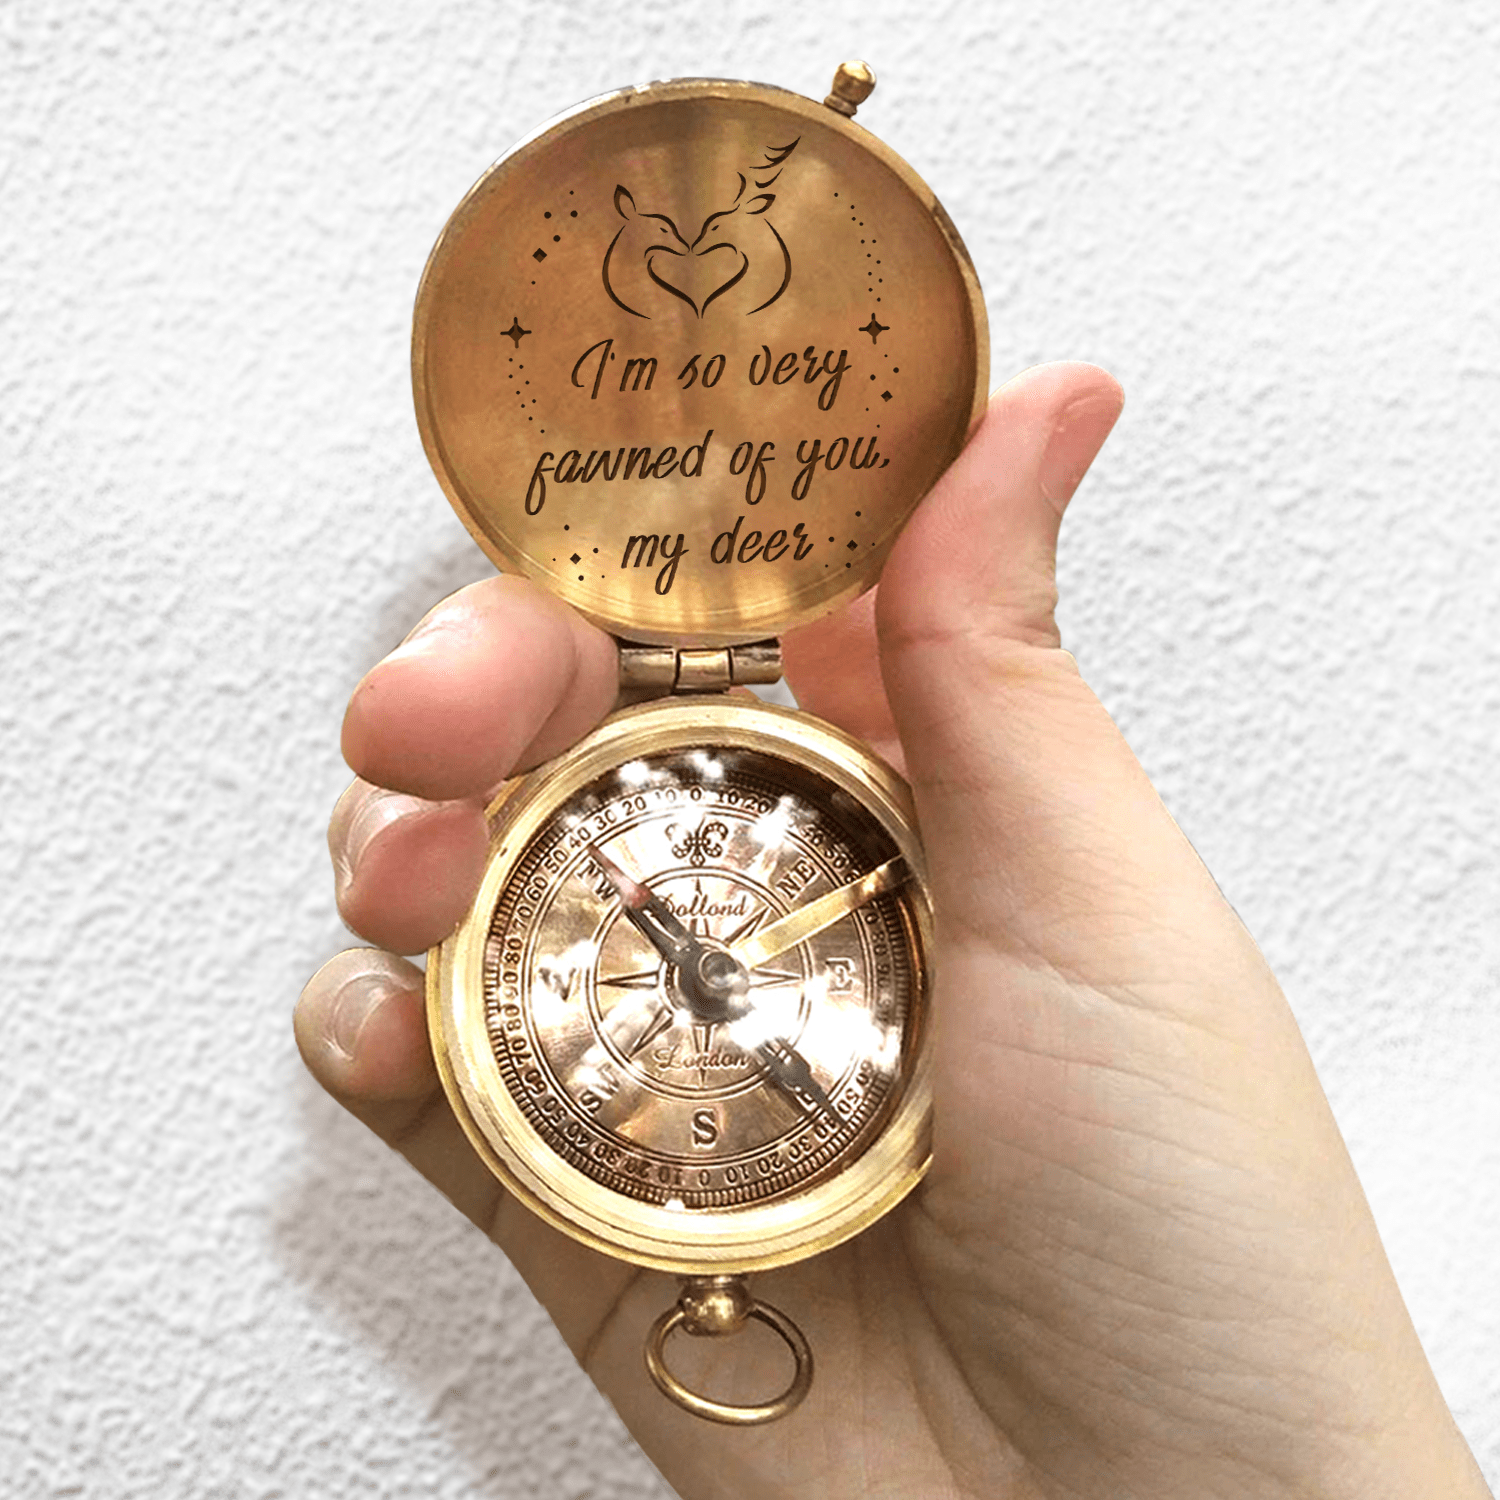 Engraved Compass - Hunting - To Loved One - I'm So Fawned Of You - Gpb13015